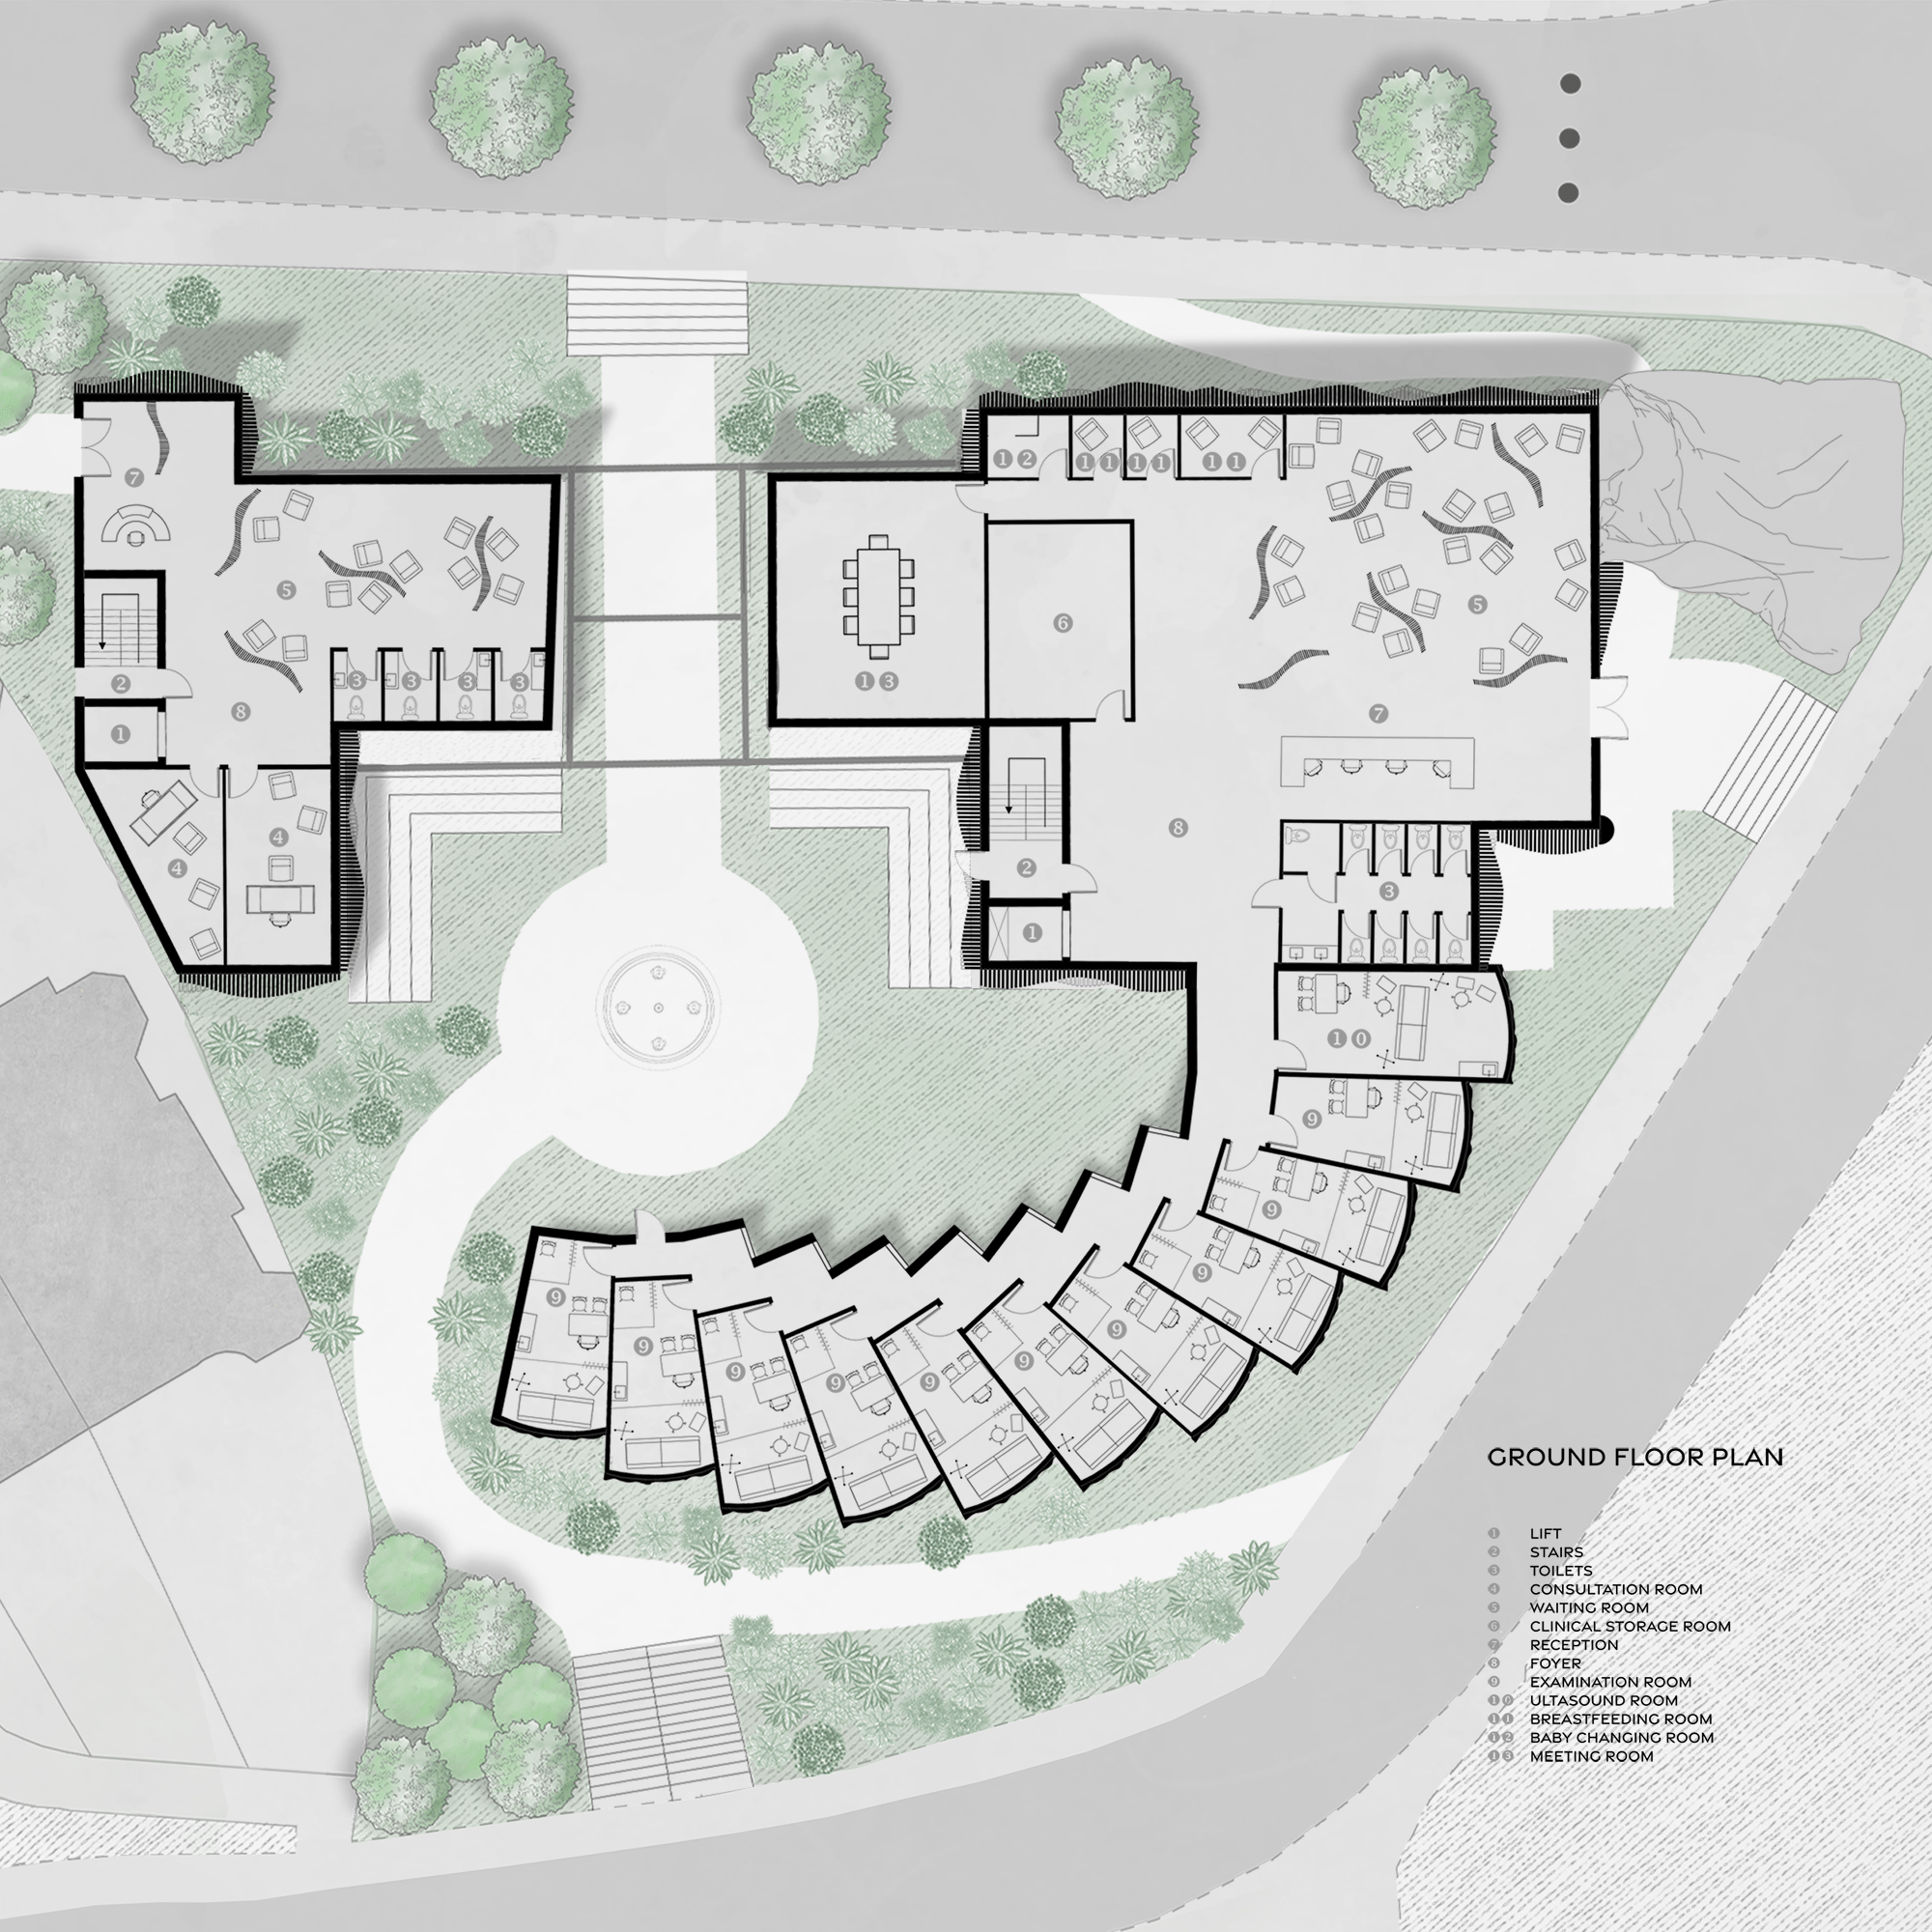 Architectural drawing by Alice Collins showing the ground floor plan of the Bodichon Centre.